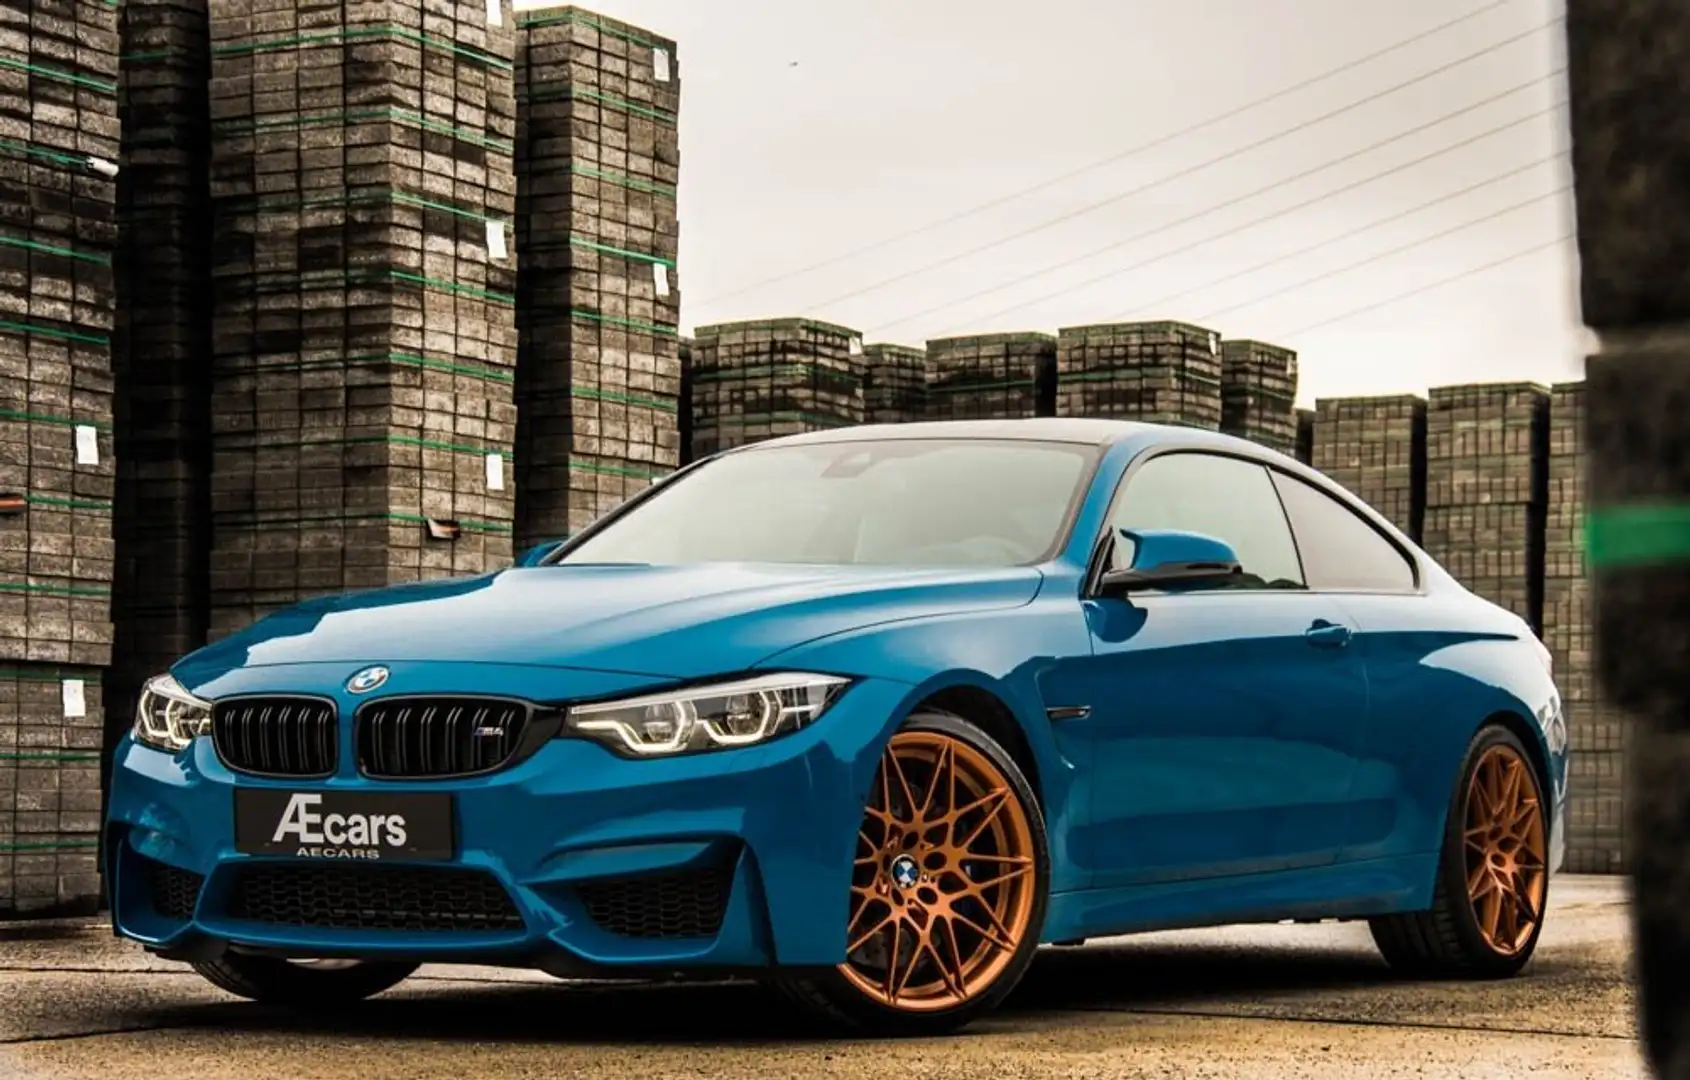 BMW M4 *** COMPETITION HERITAGE / LIMITED 1 OF 750 *** Kék - 1